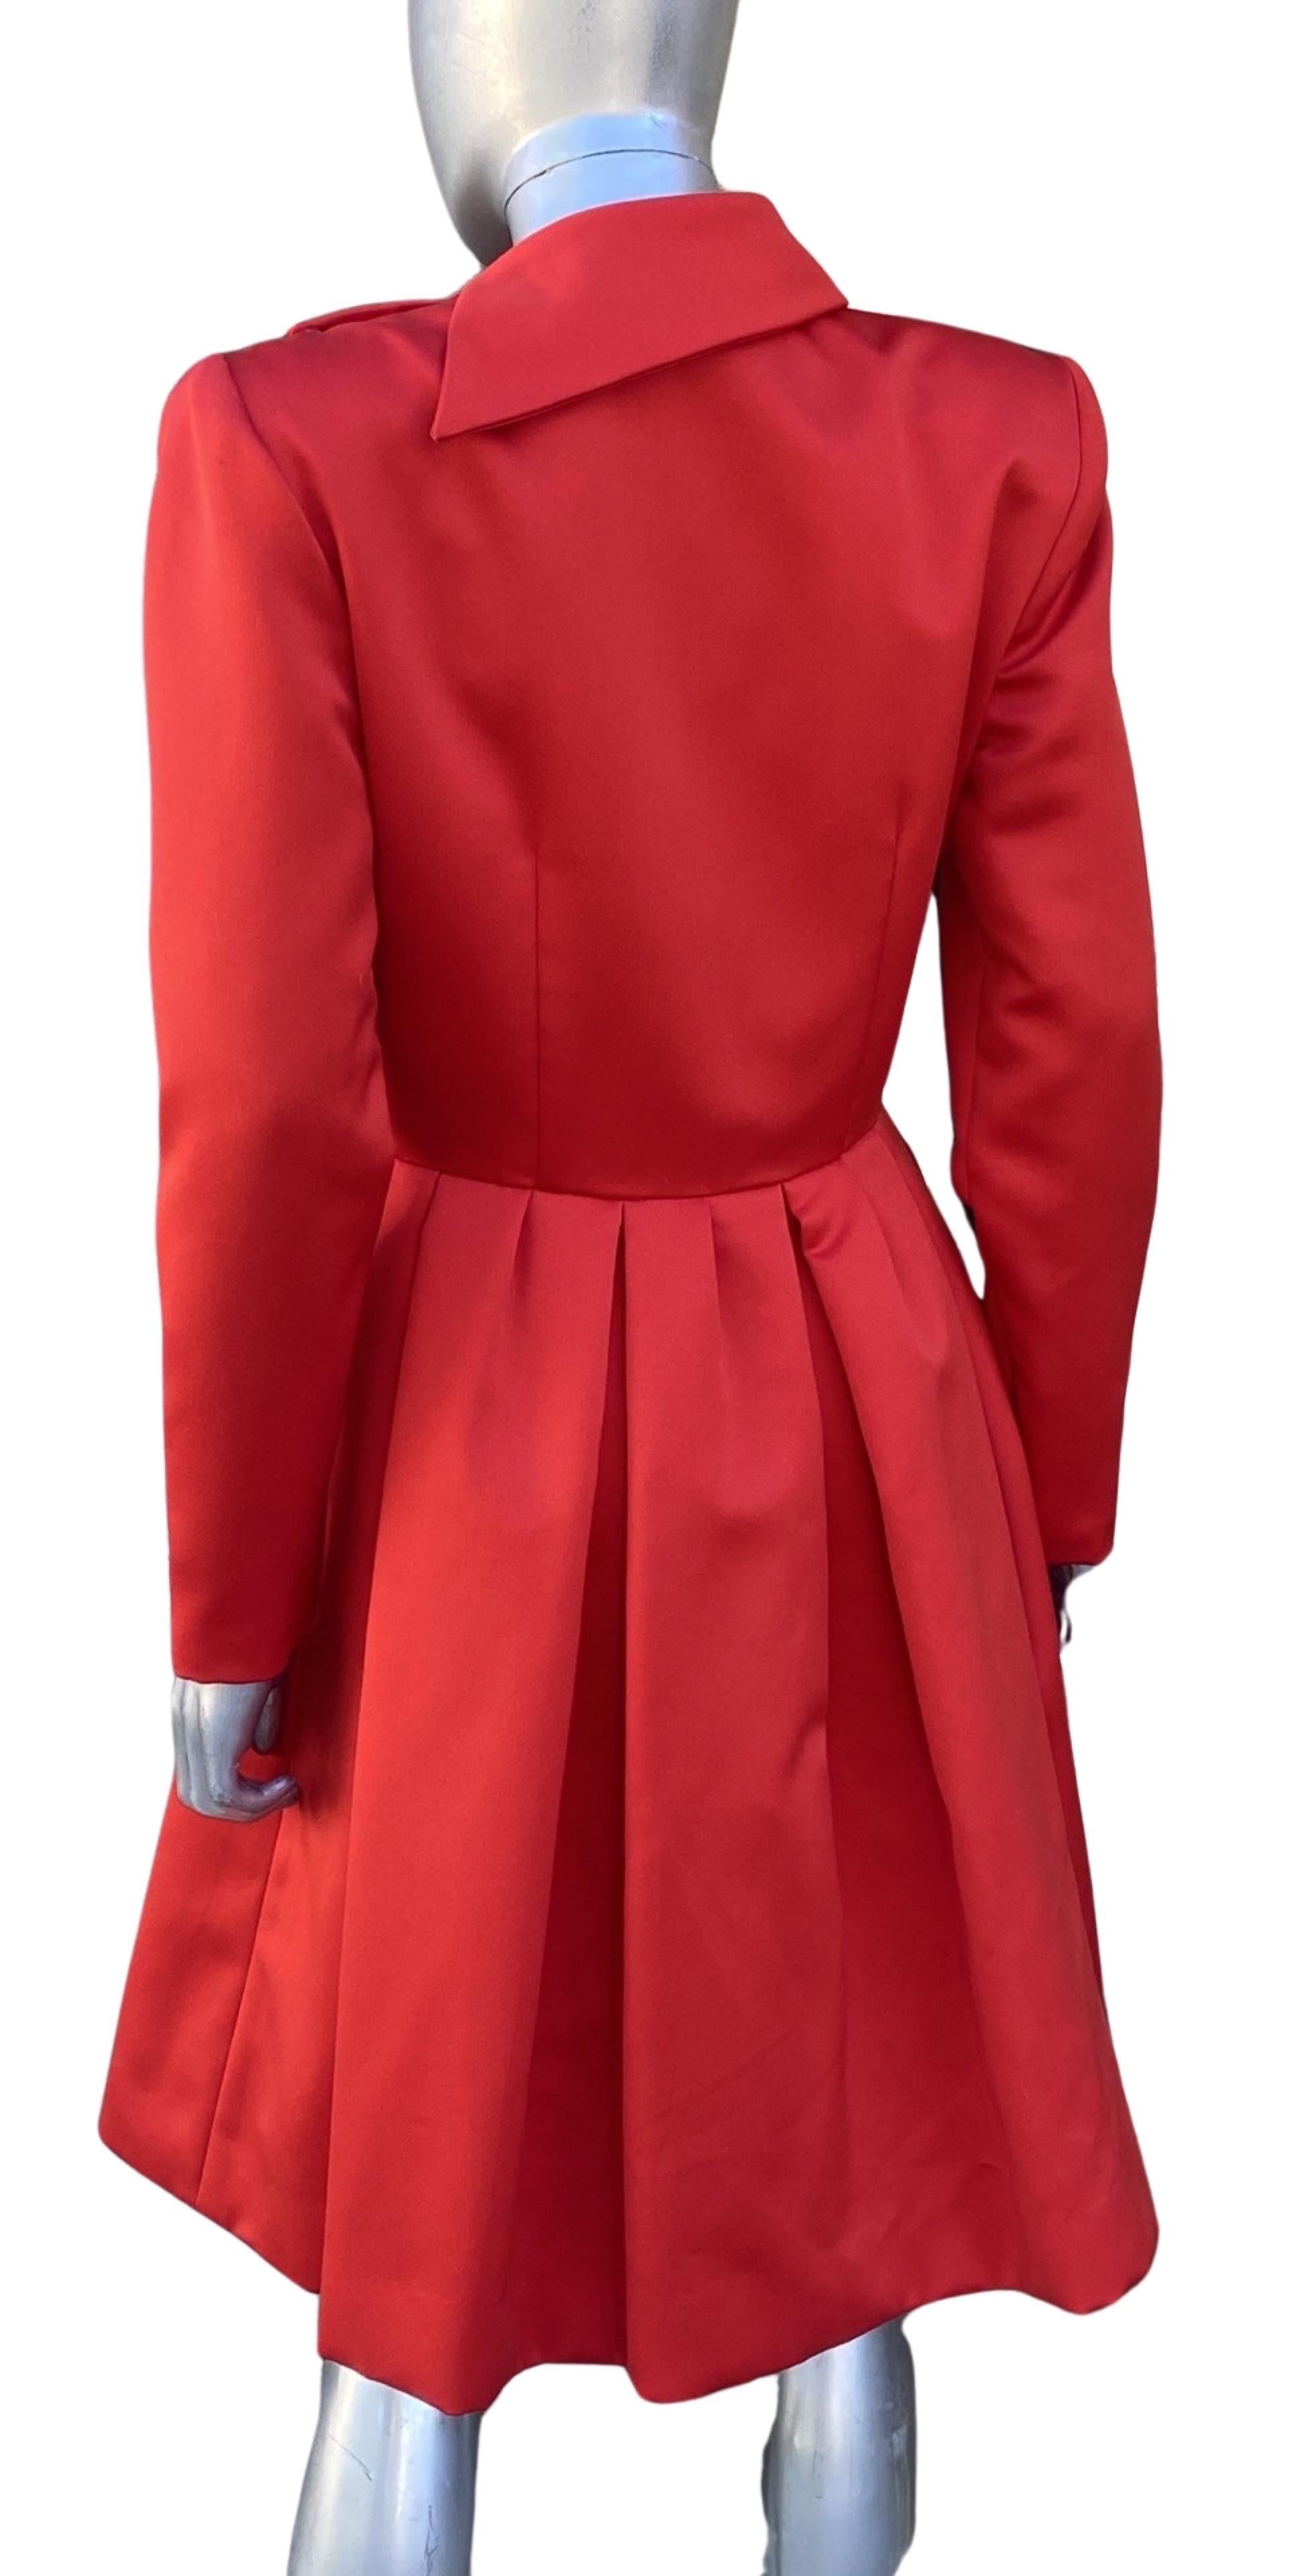 Red Satin and Rhinestone Button Coat Dress by Victor Costa Neiman Marcus Size 8 For Sale 2